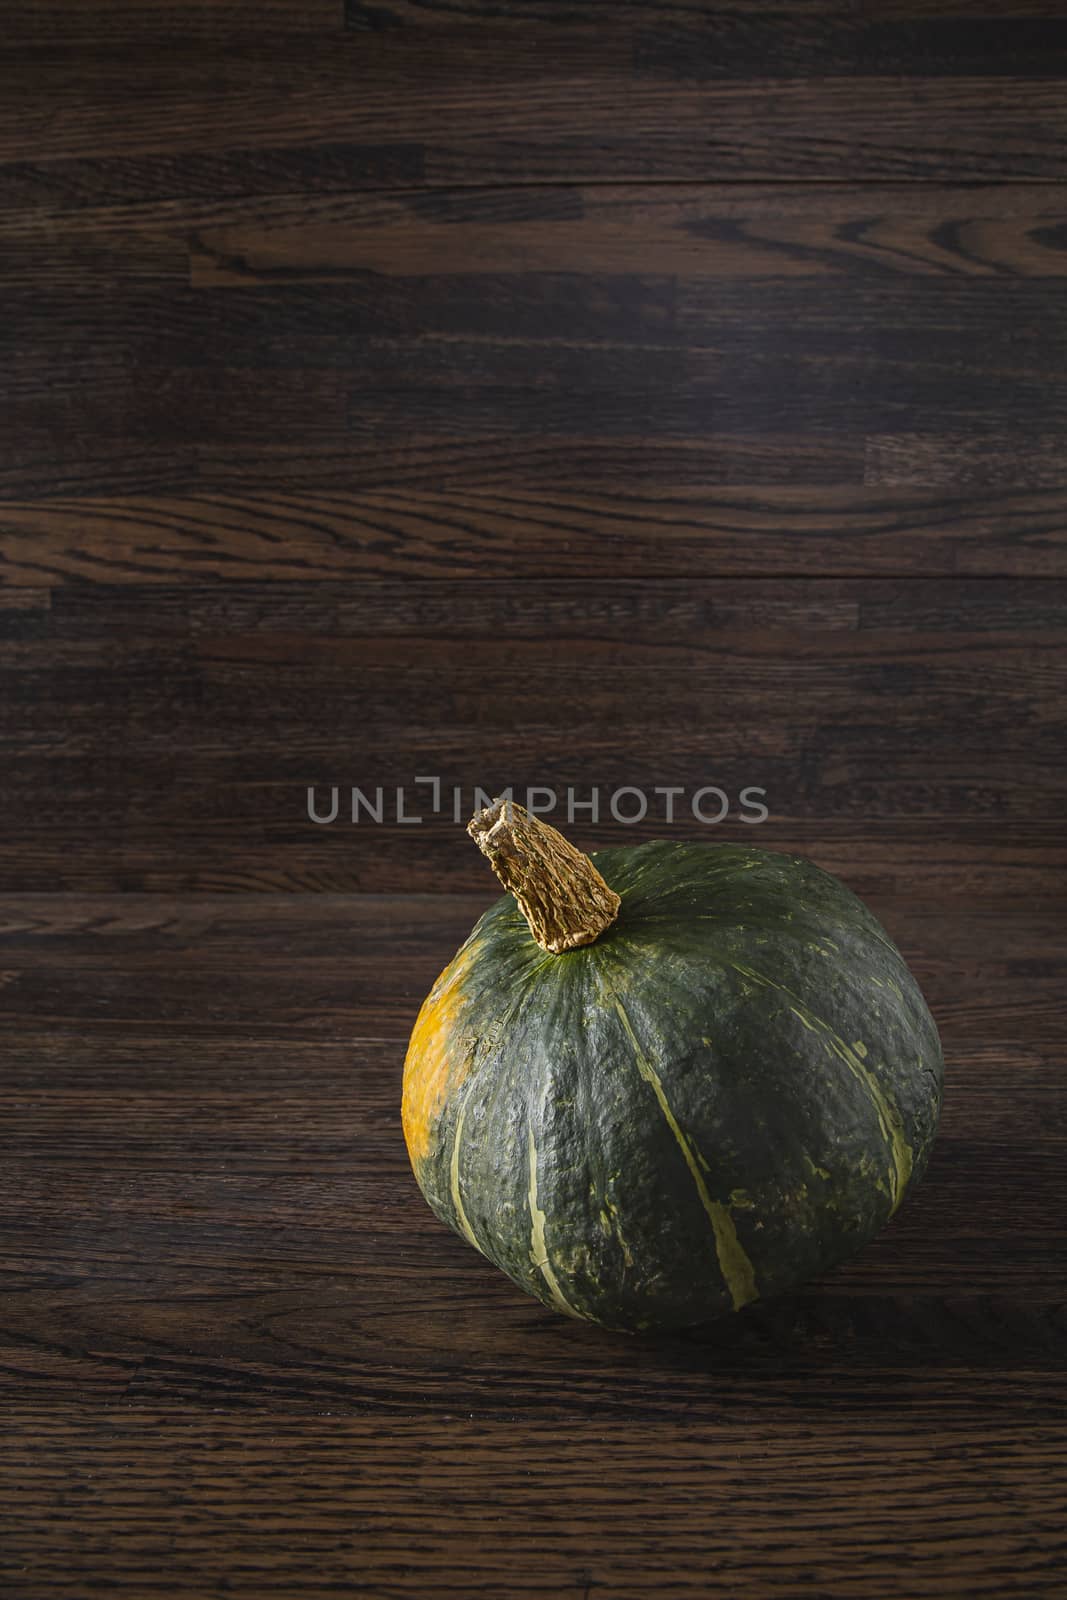 Lonely squash by mypstudio